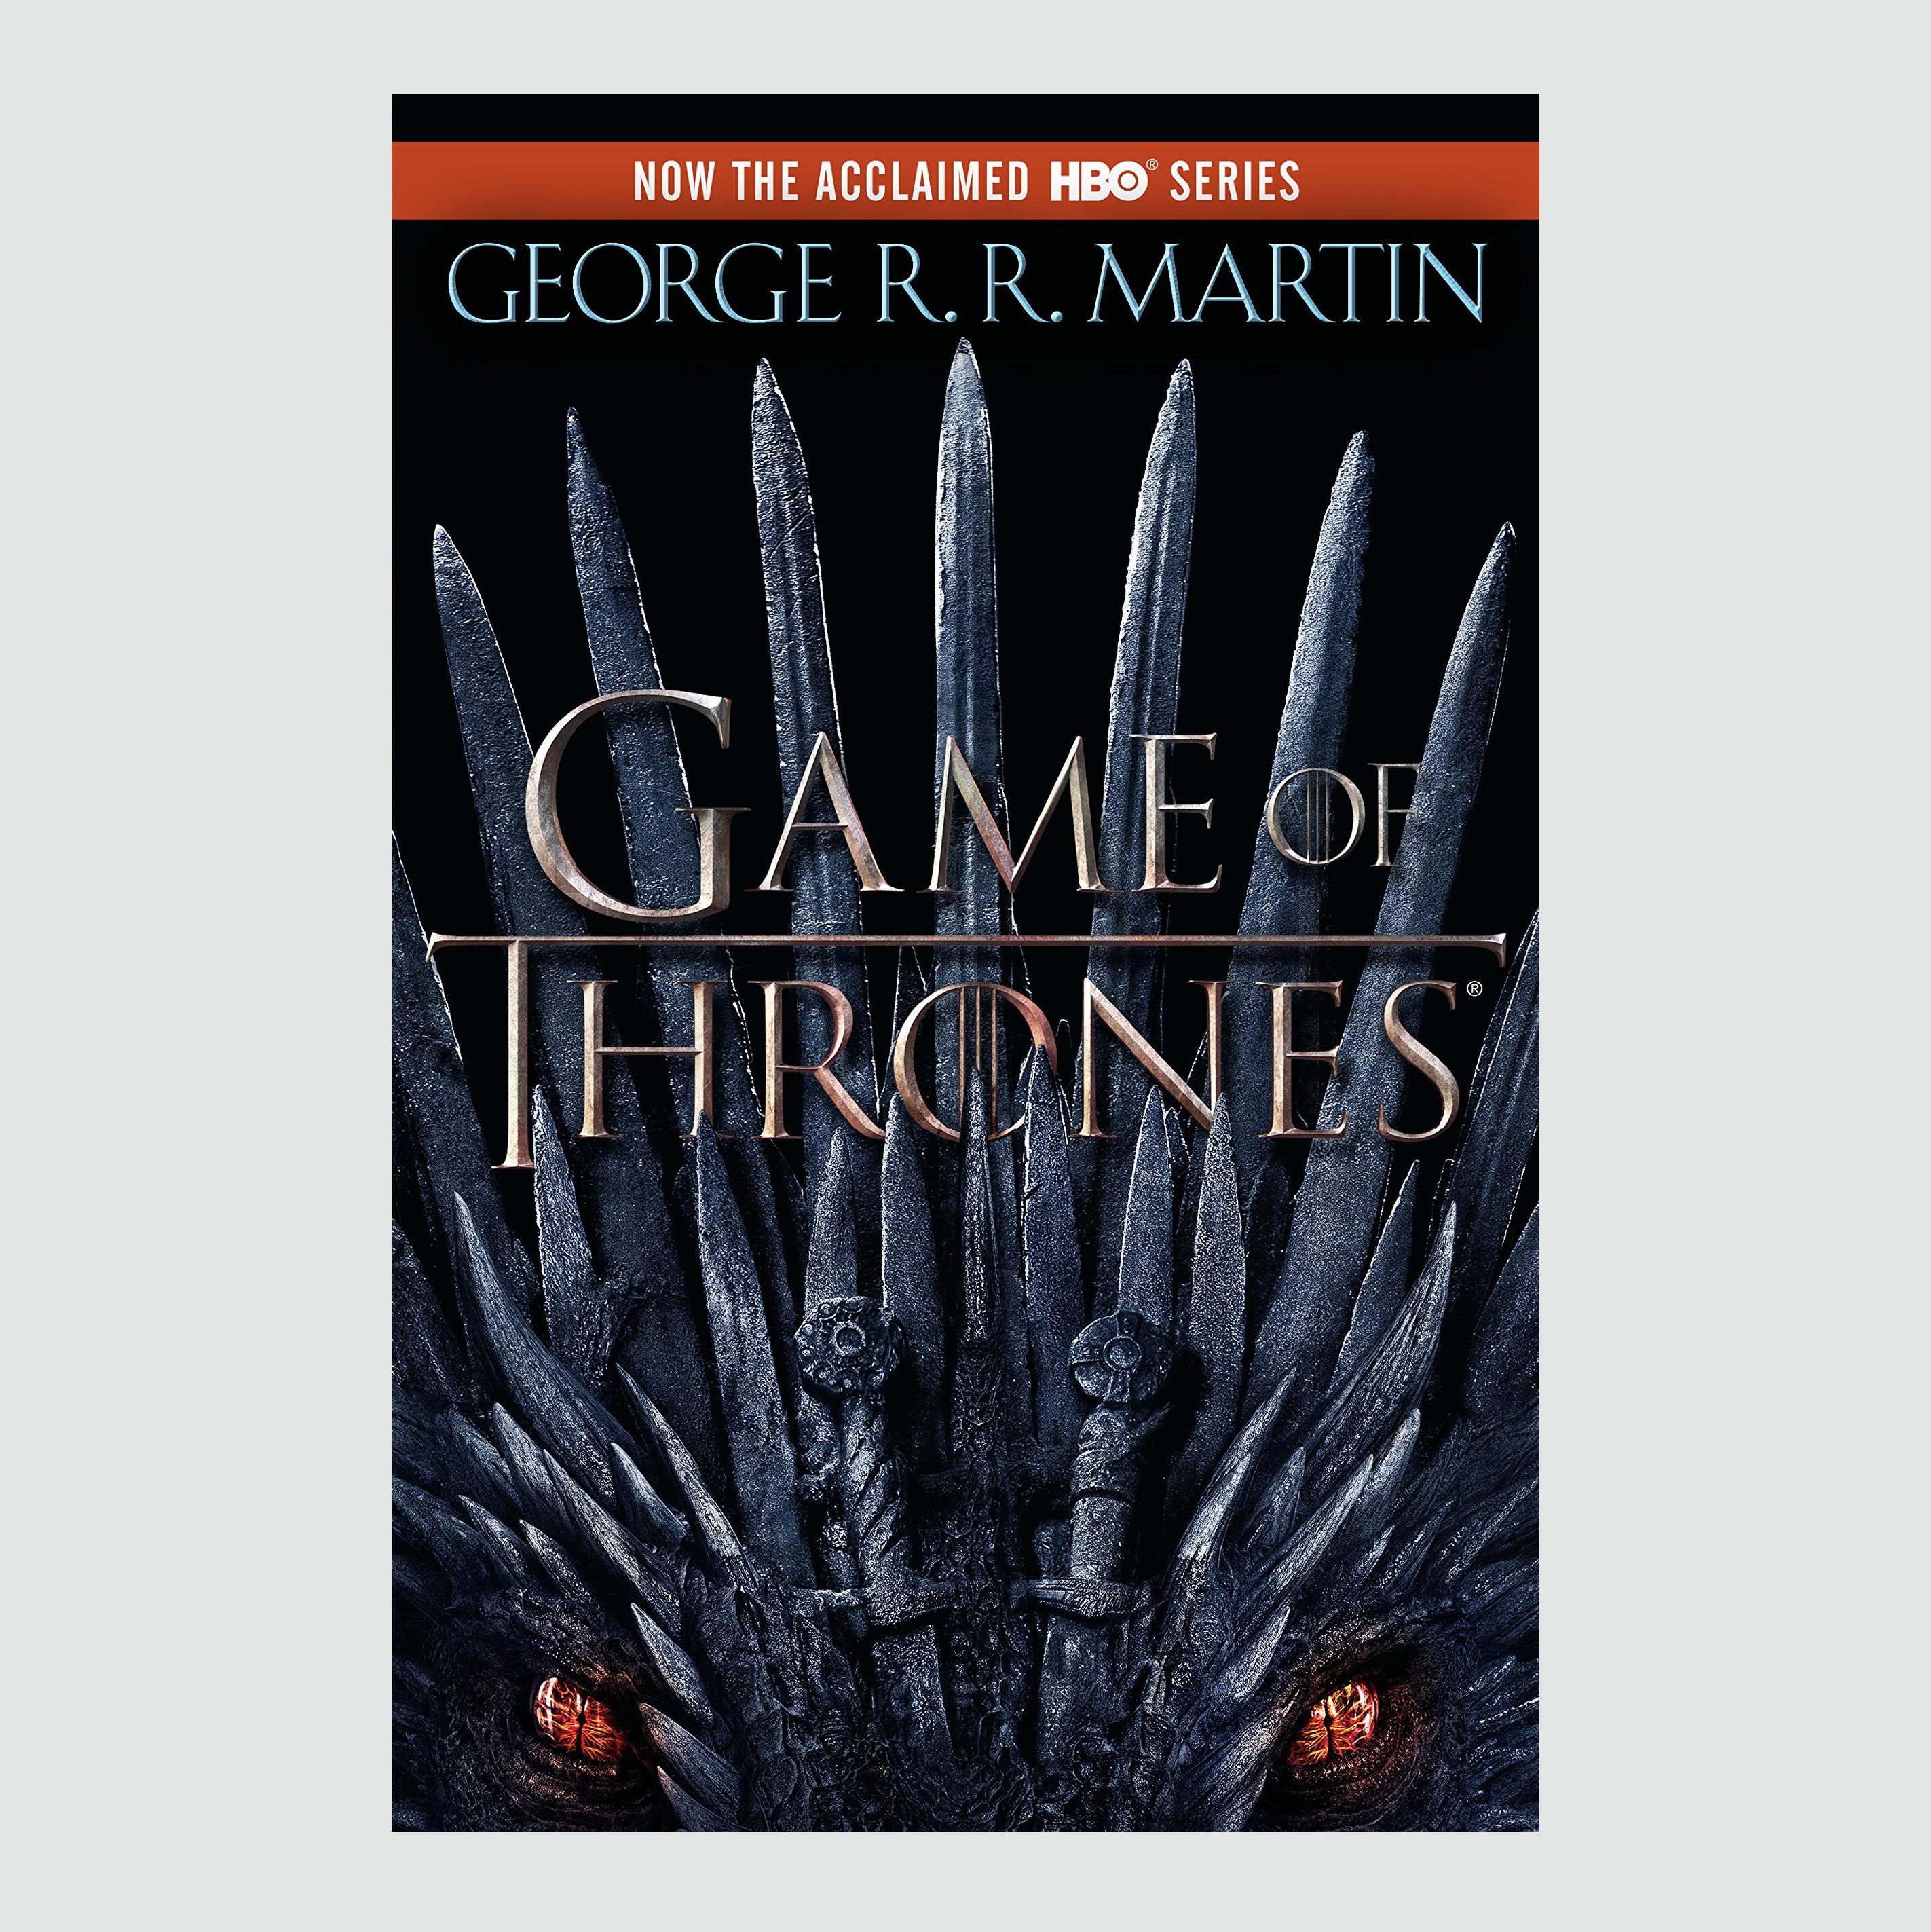 A Game of Thrones (A Song of Ice and Fire #1)